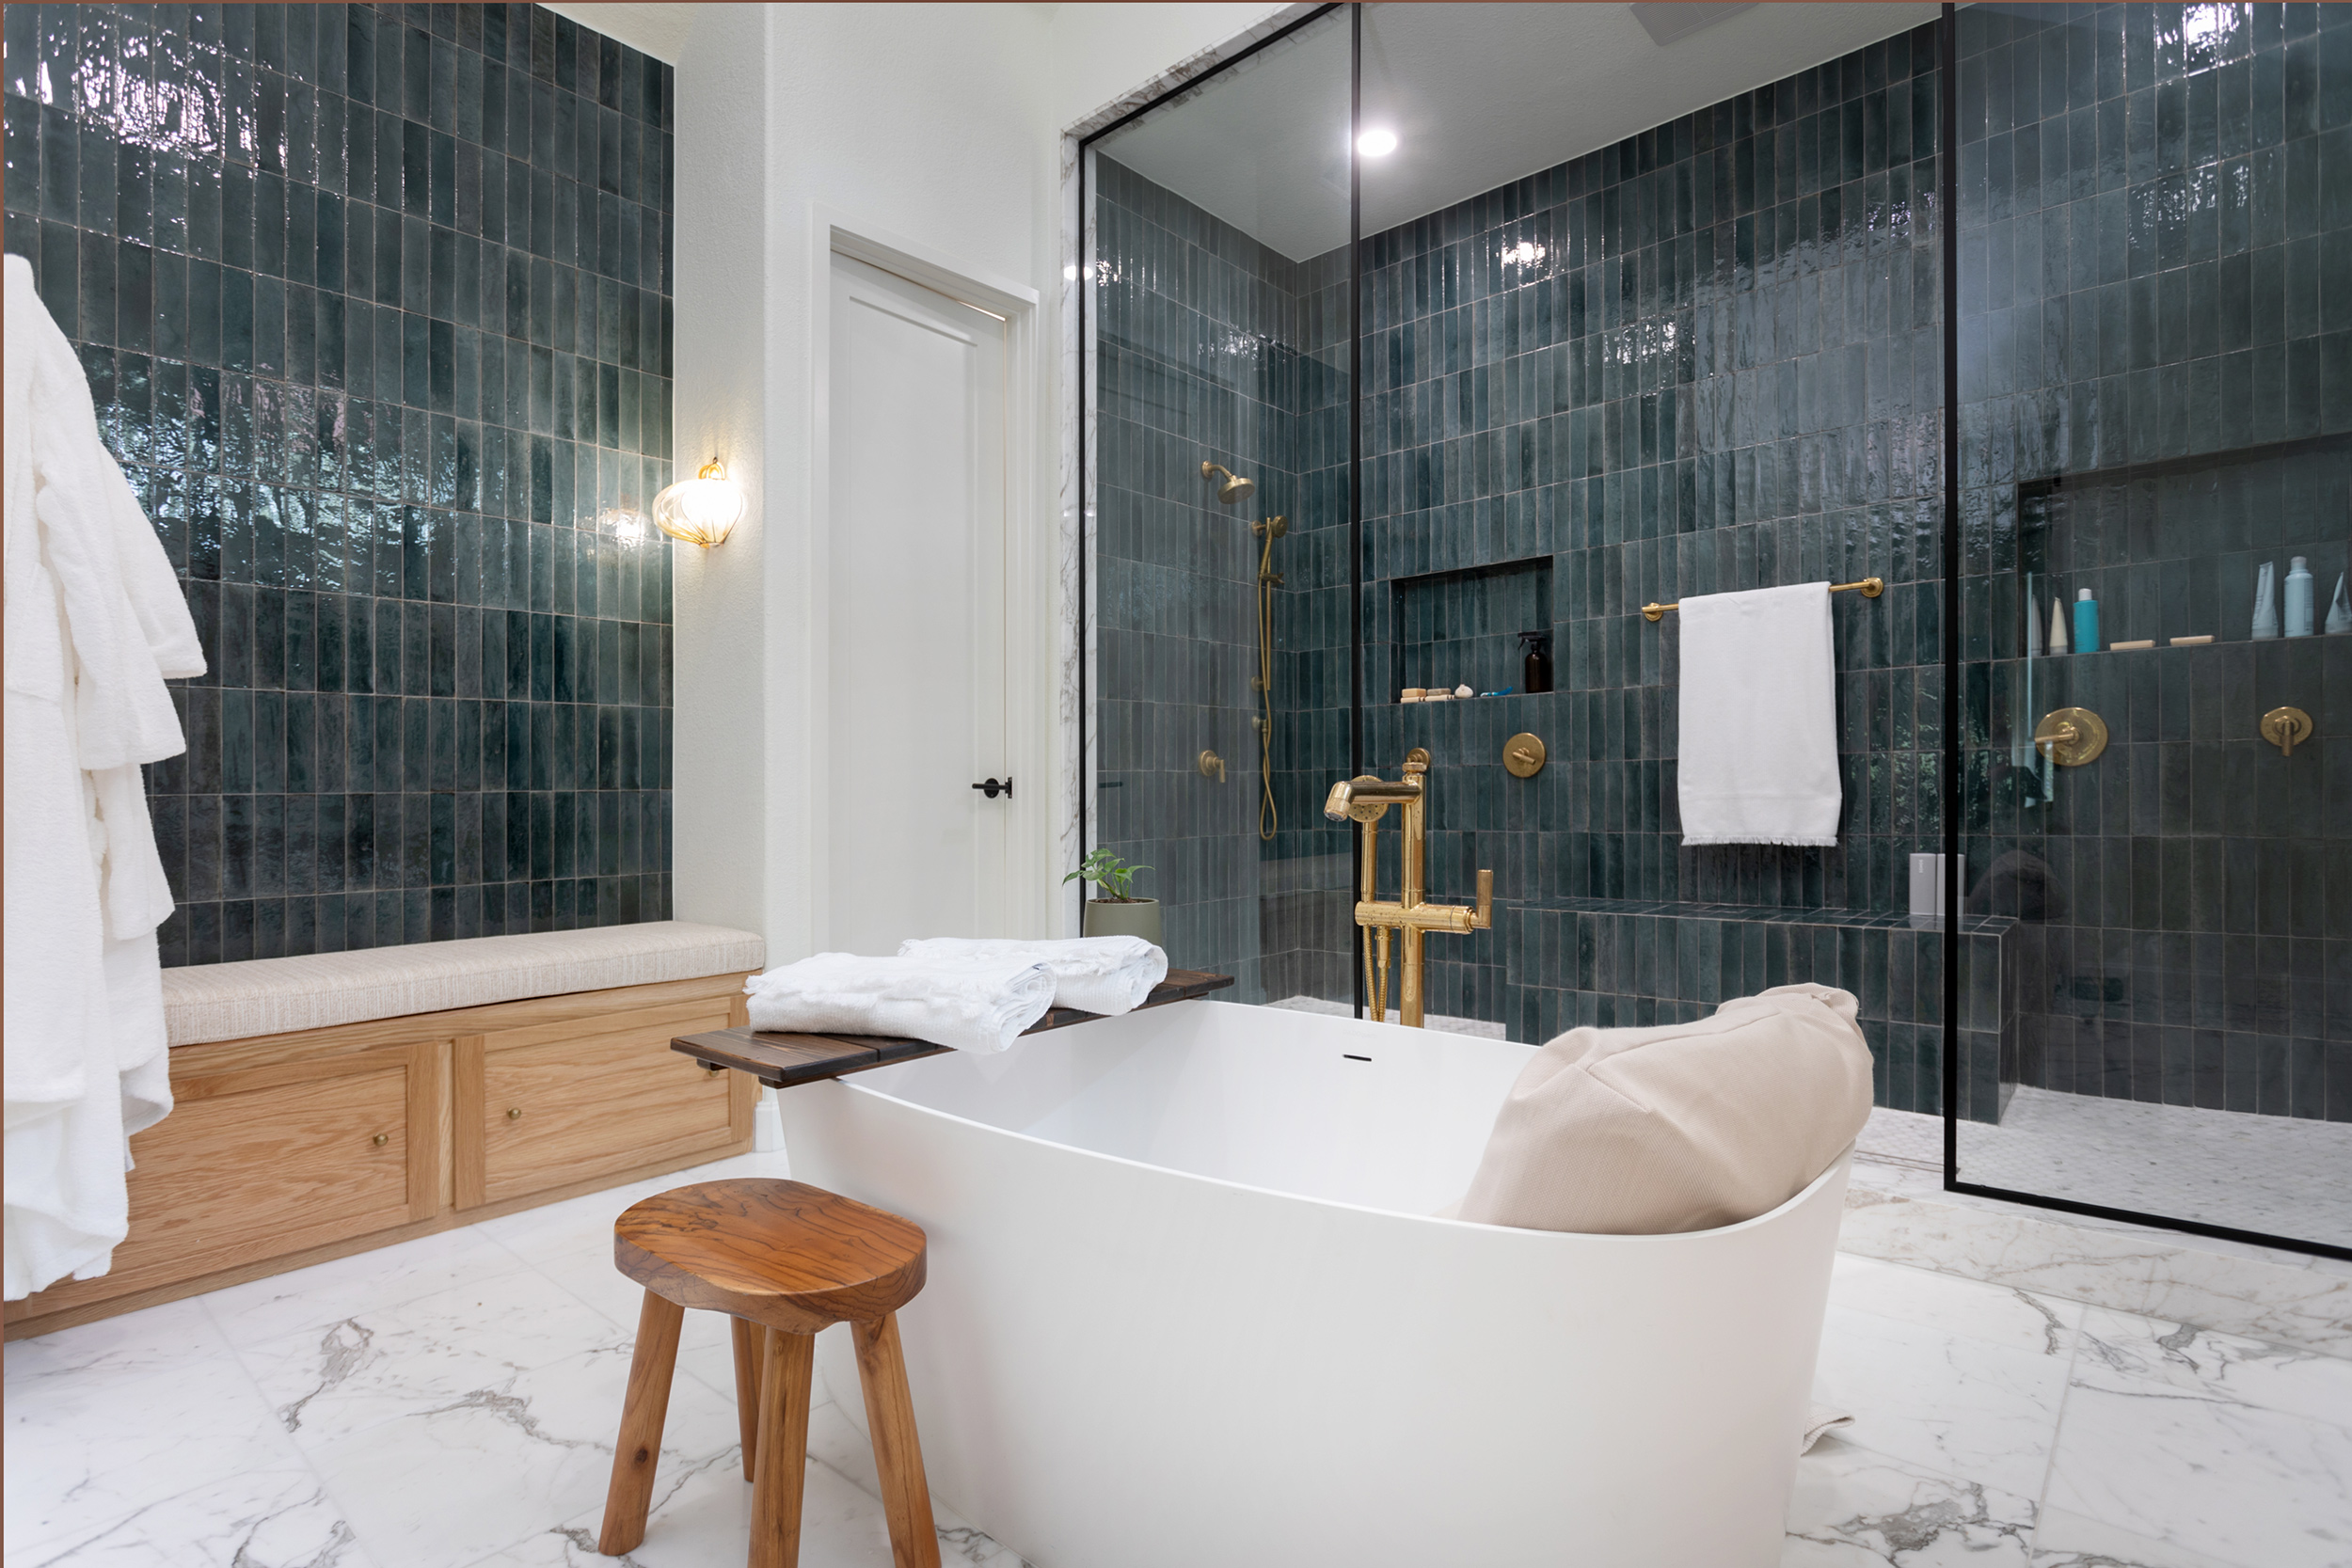 Bathroom gorgeous Remodel - Bathroom Remodel: Transform Your Space with Style